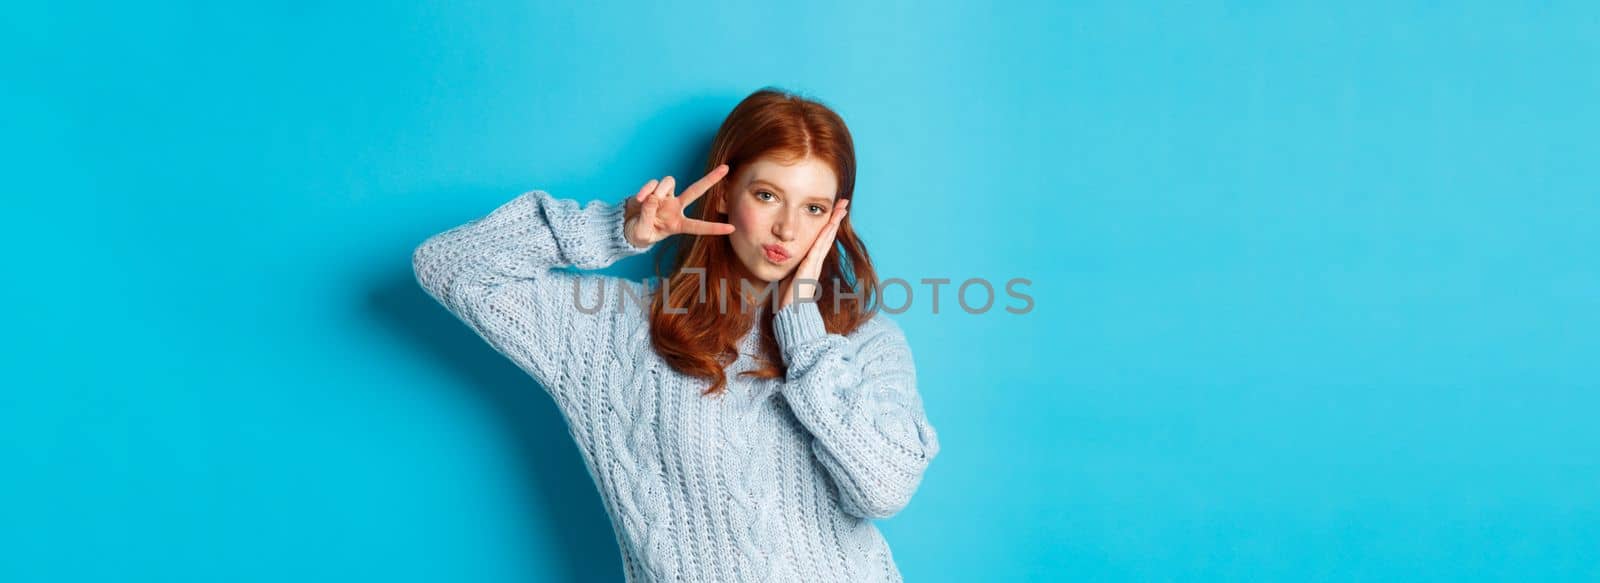 Modern teen girl with red hair, showing peace sign and posing in sweater against blue background.